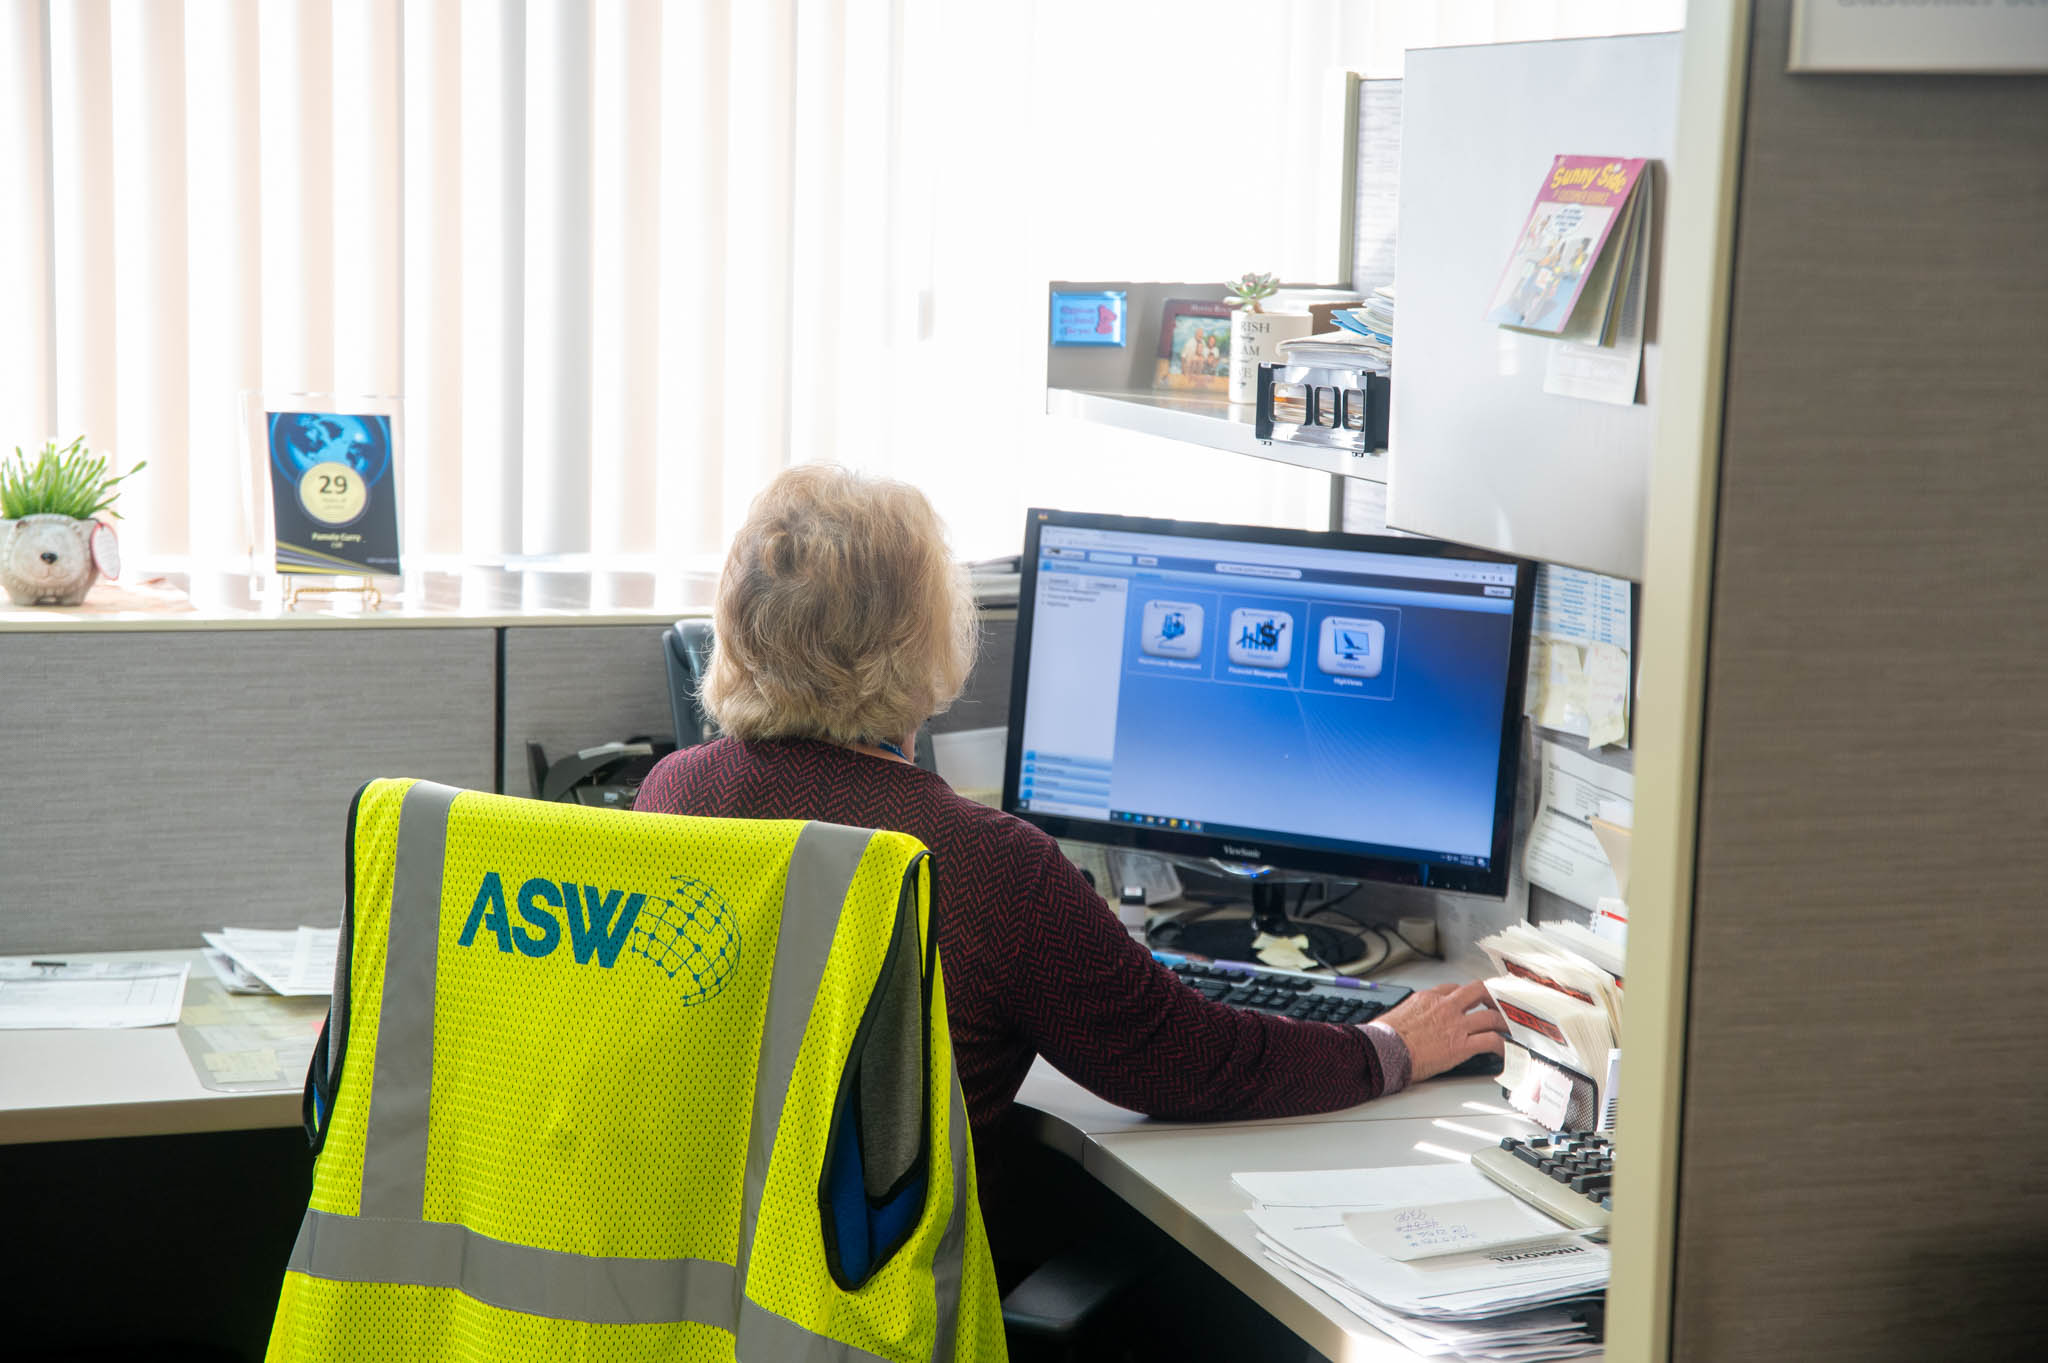 An ASW Global Customer Service Representative works on the computer.